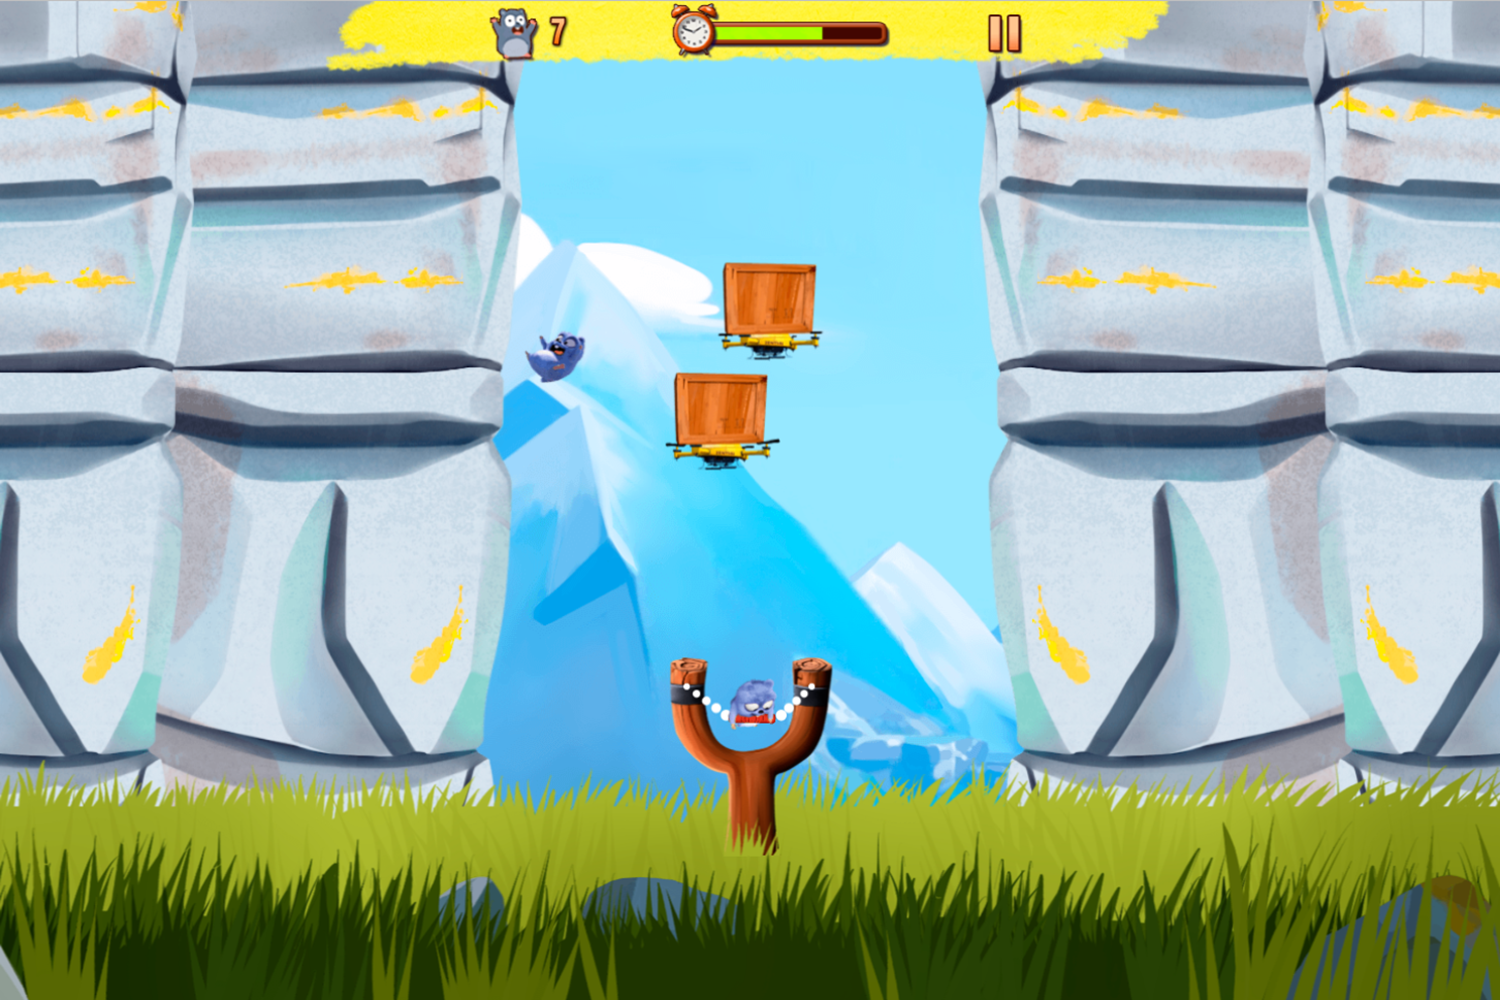 Grizzy and the Lemmings Lemmings Sling Game Play Screenshot.